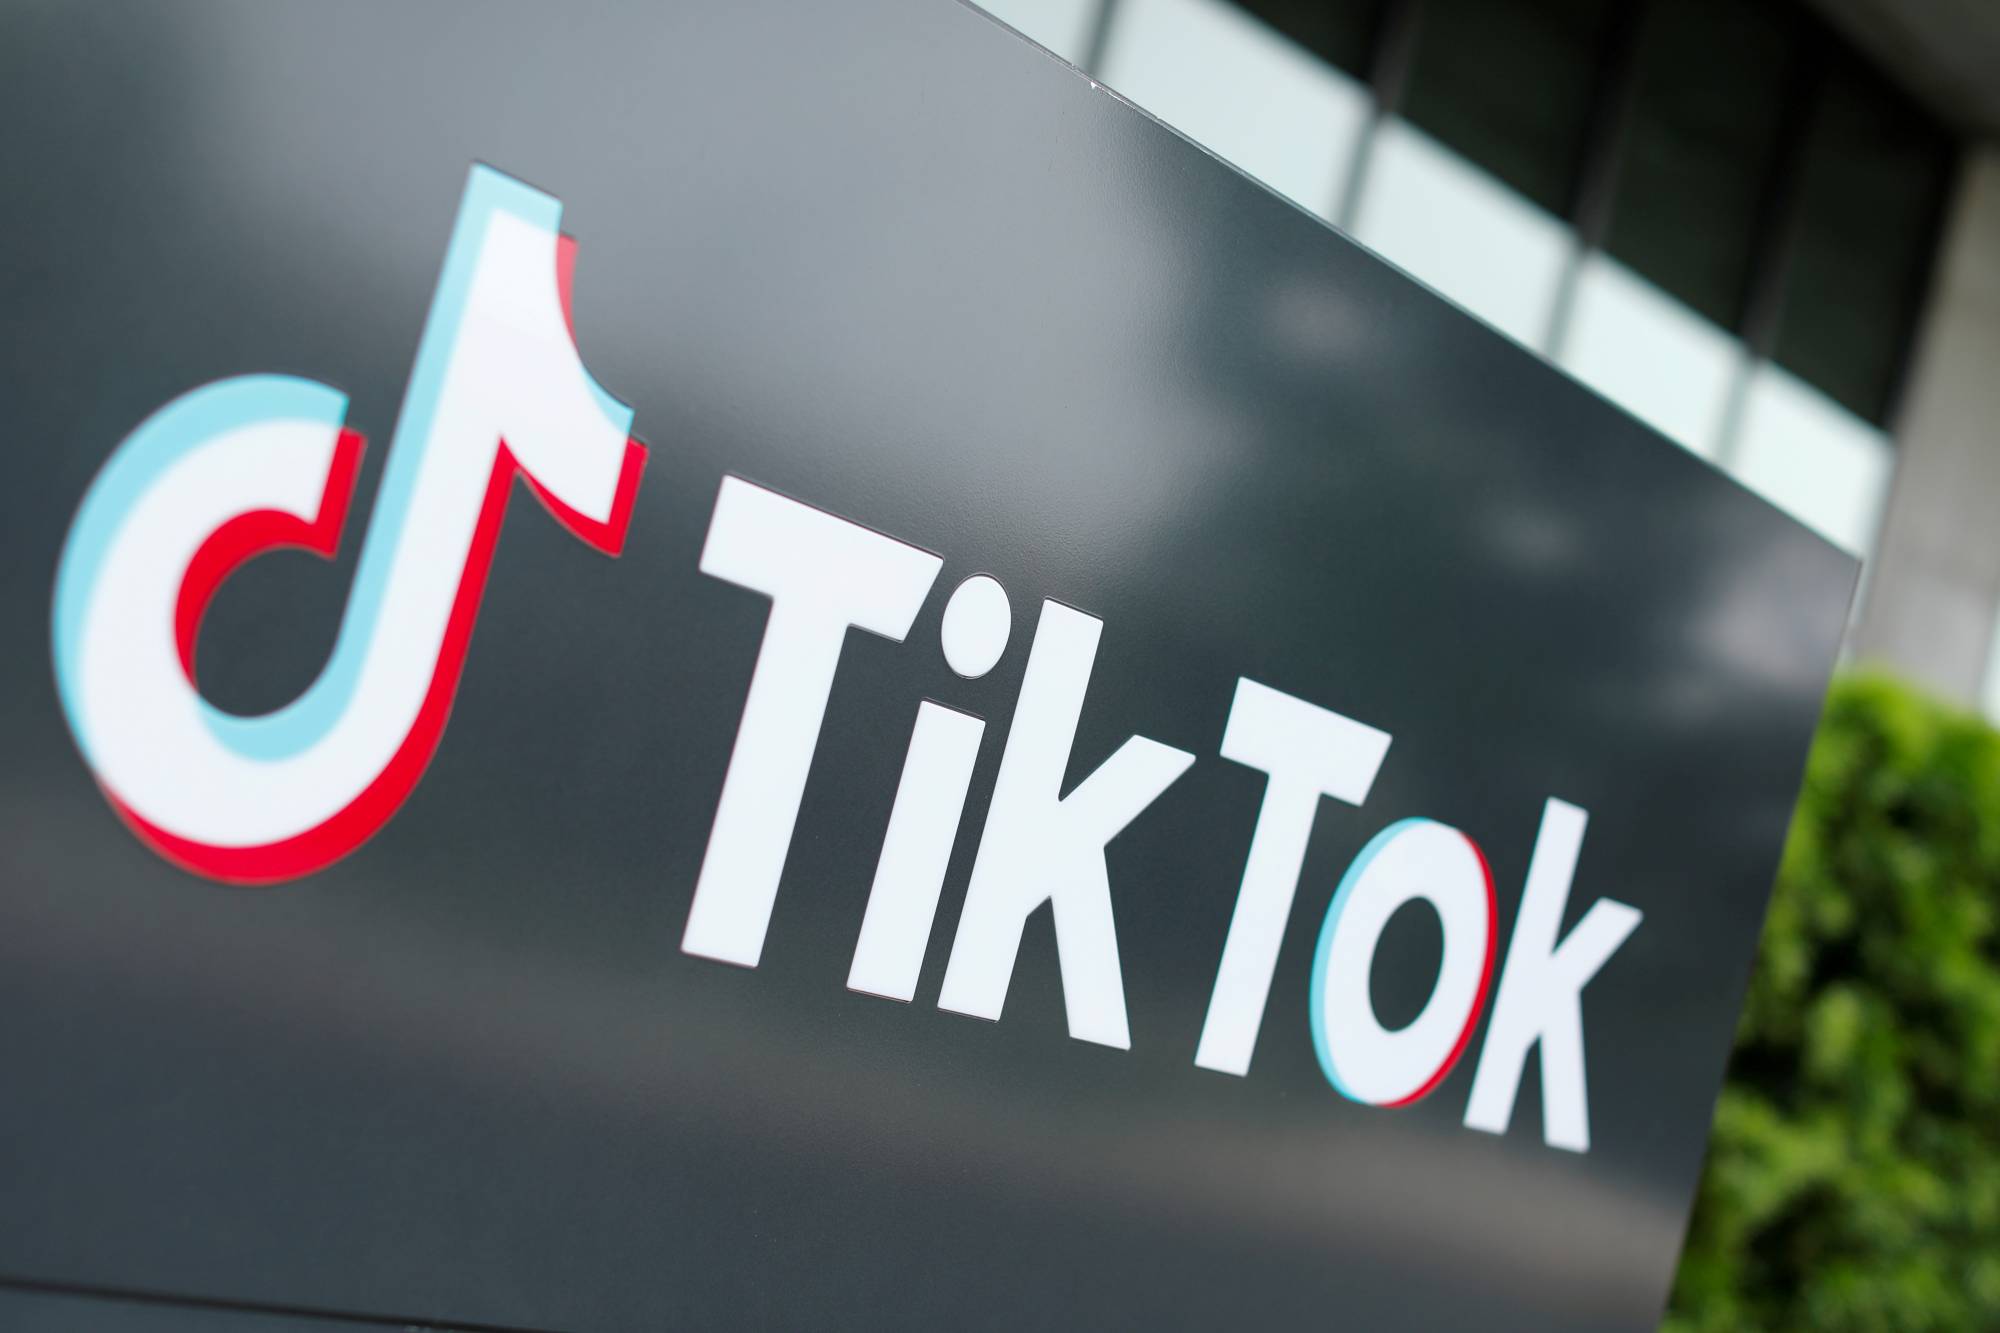 The ban, which was scheduled to go into effect at 11:59 p.m. Sunday in New York, would have removed TikTok from the app stores run by Apple Inc. and Google’s Android, the most widely used marketplaces for downloadable apps. | REUTERS